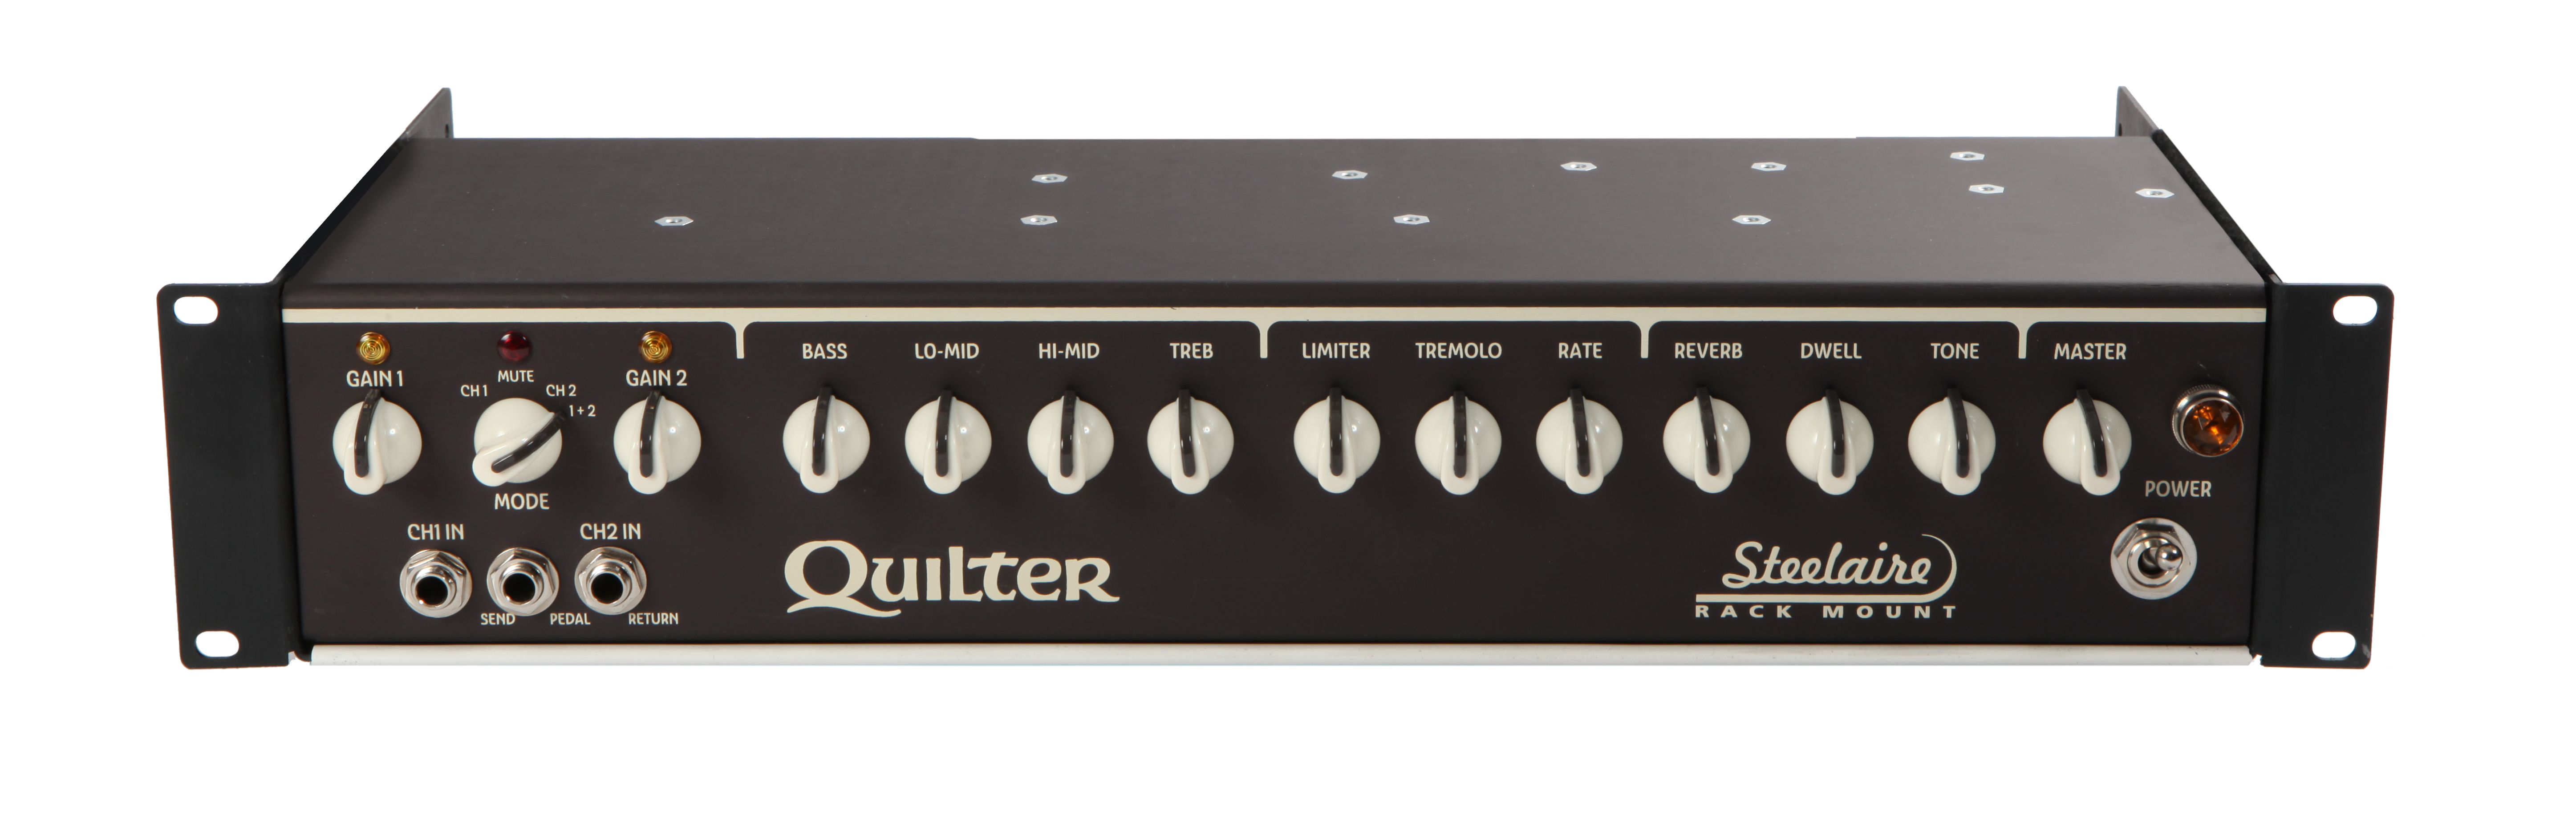 Steelaire Rackmount | Quilter Performance Amplification